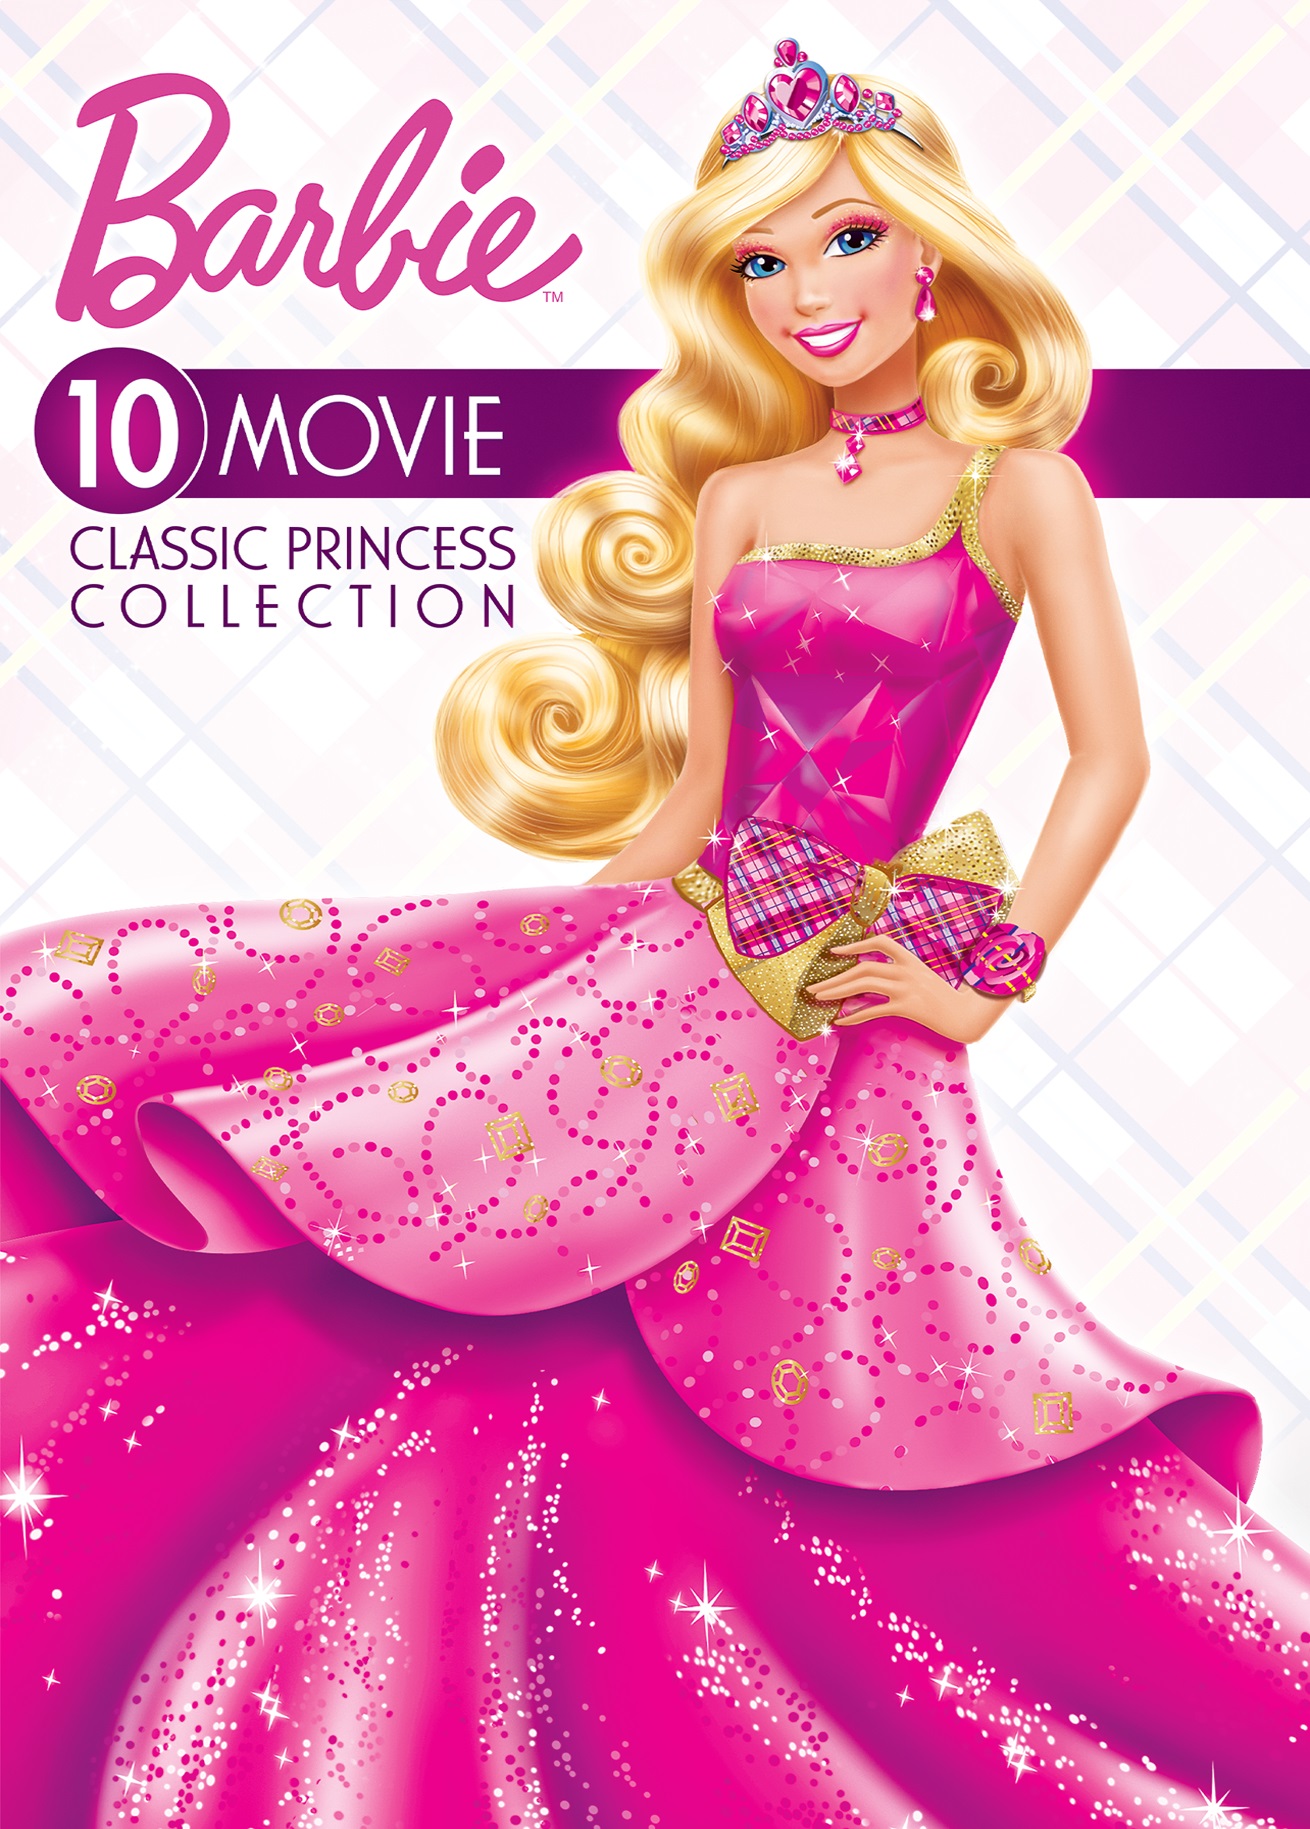 Barbie 10 Movie Classic Princess Collection [dvd] Best Buy